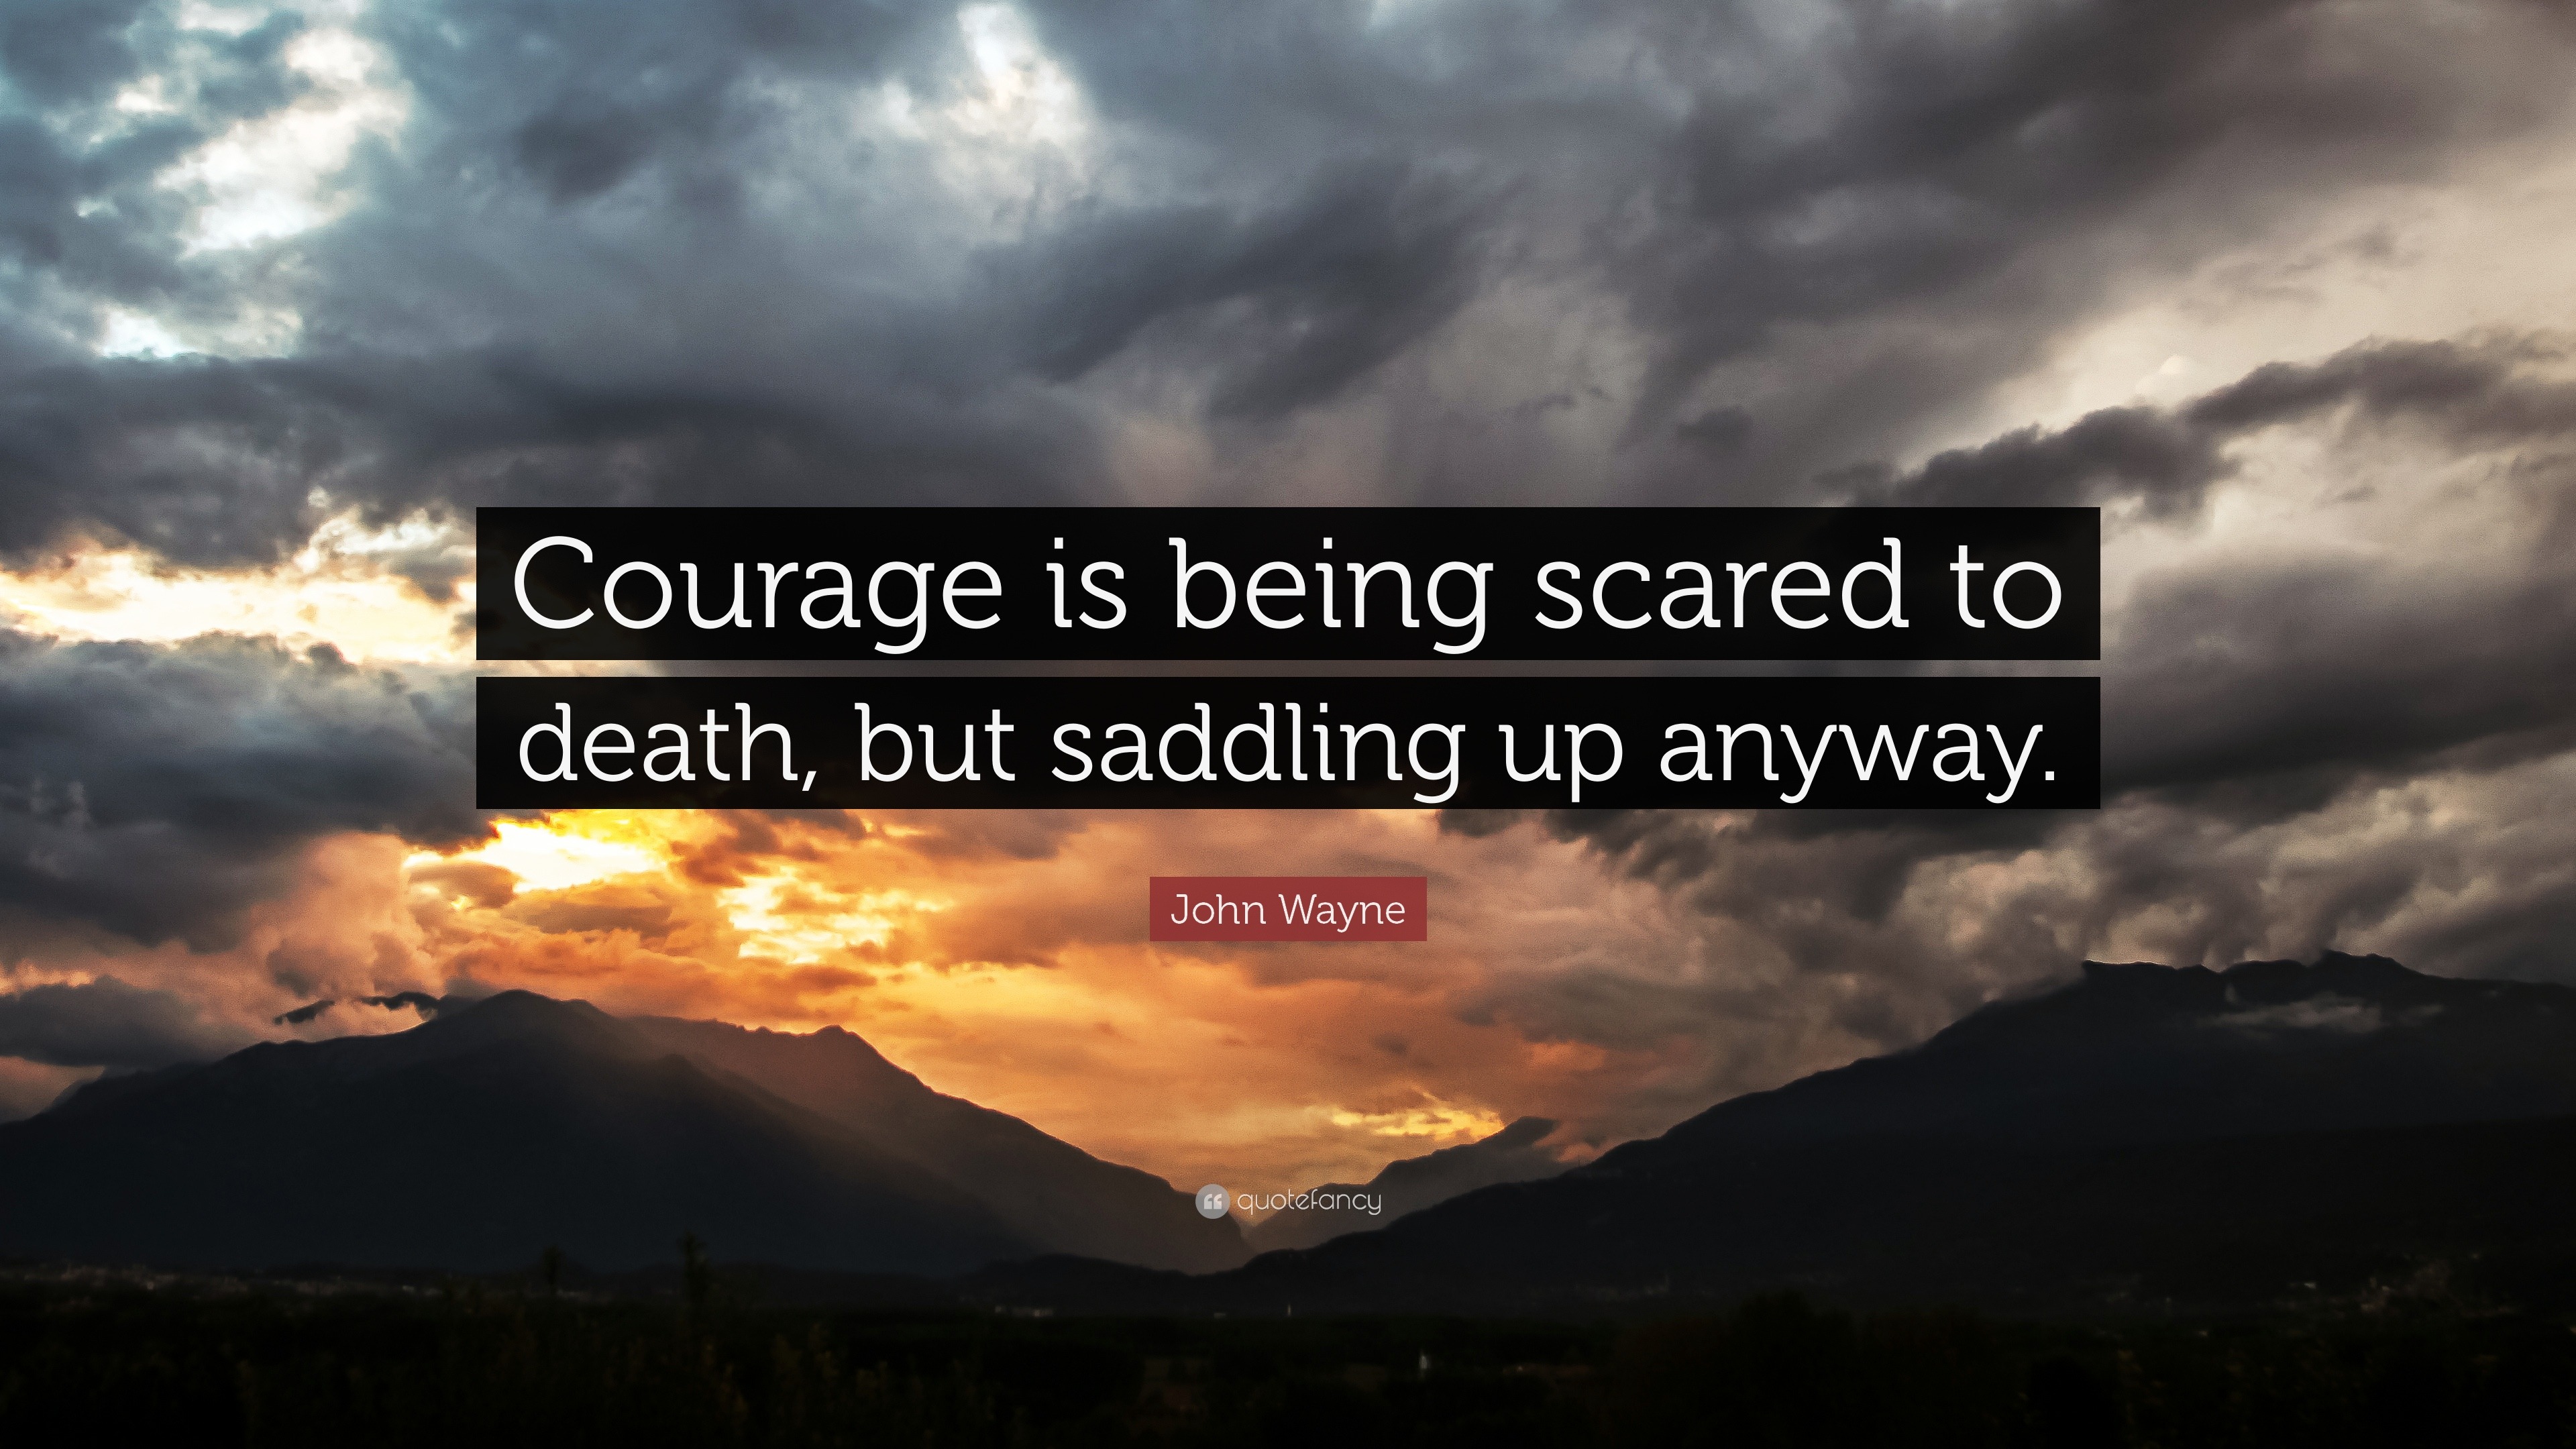 4619 John Wayne Quote Courage is being scared to death but saddling up